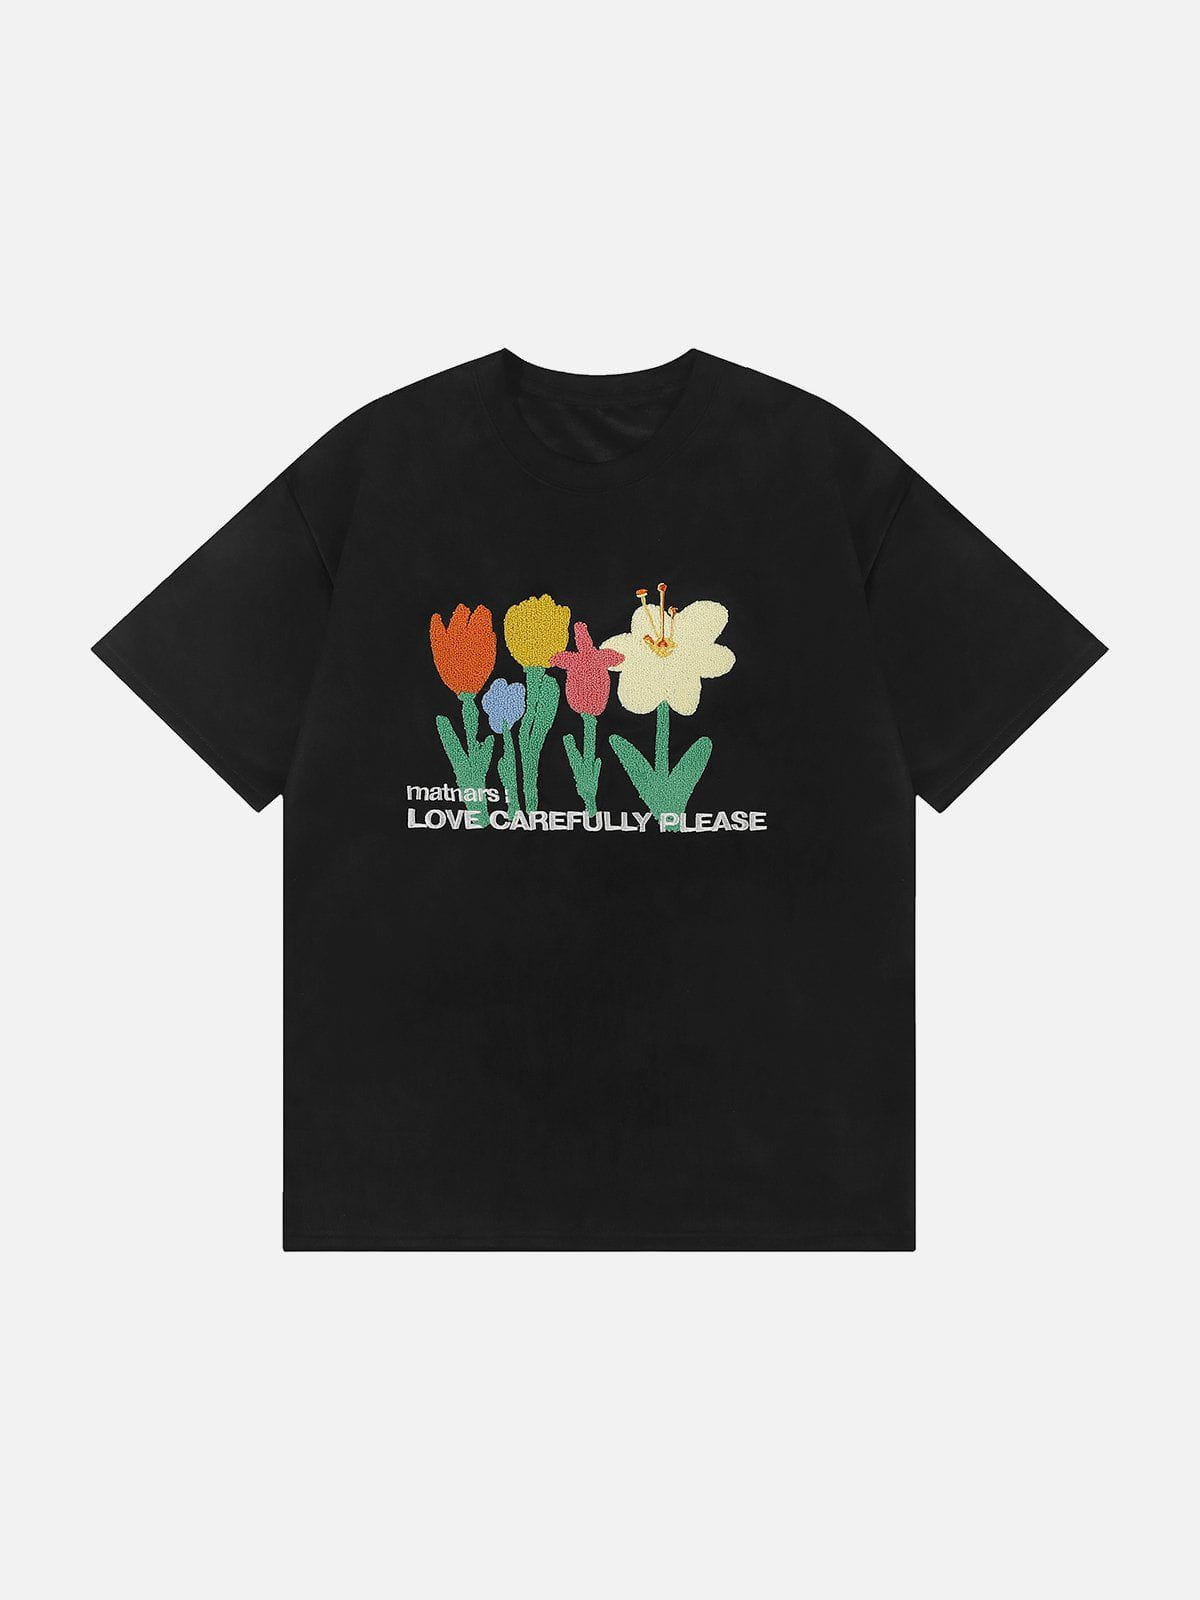 Sneakerland™ - Floral Flock Embroidered Suede Tee